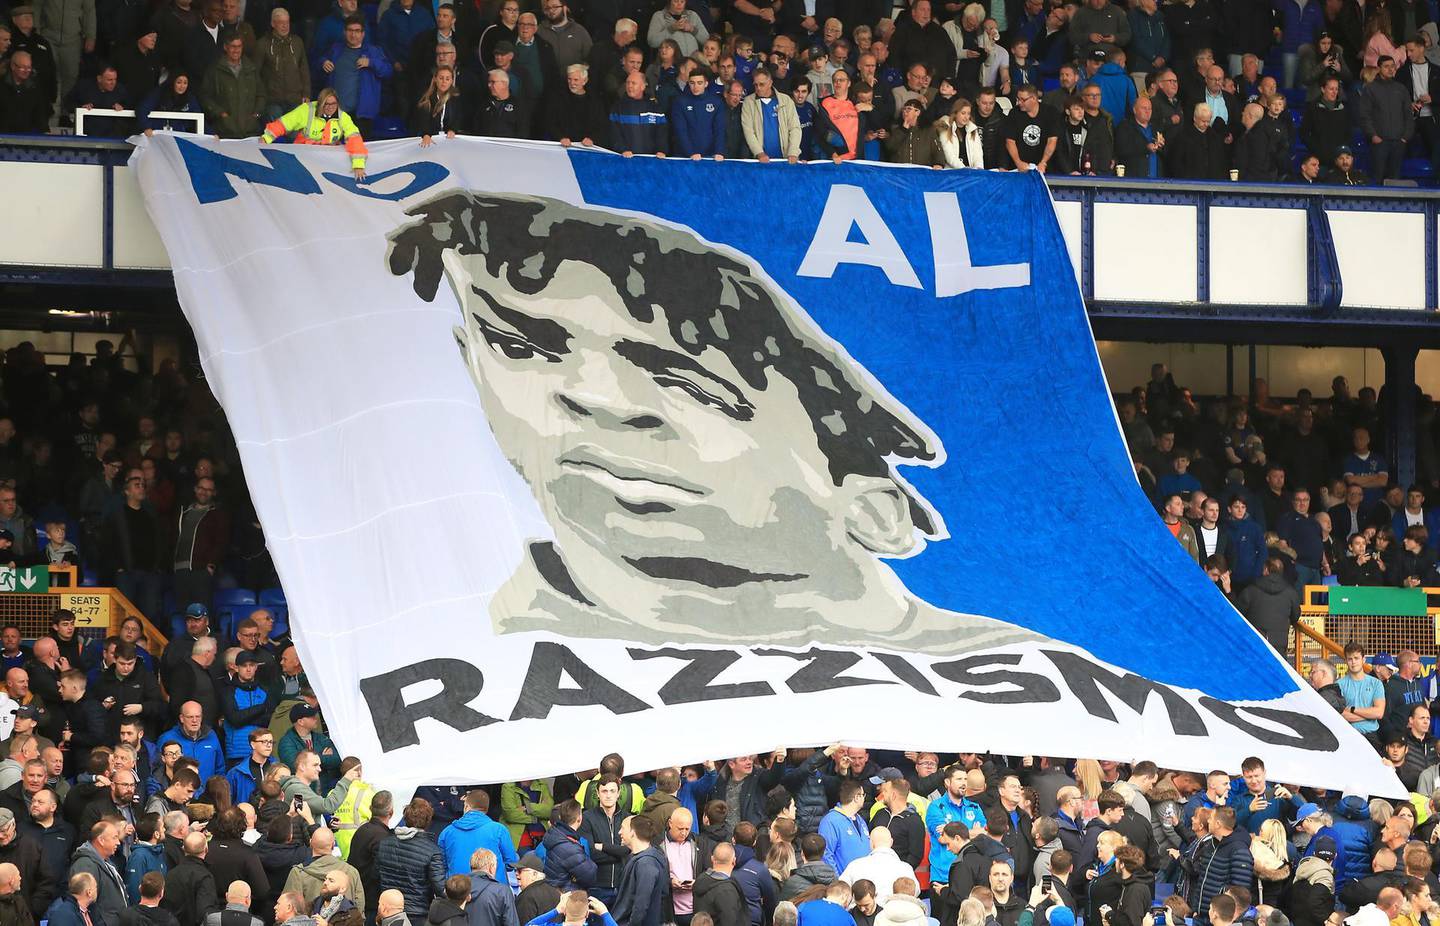 Everton's Moise Kean banner denouncing racism during the Premier League match at Goodison Park, Liverpool. PA Photo. Picture date: Saturday September 28, 2019. See PA story SOCCER Everton. Photo credit should read: Peter Byrne/PA Wire. RESTRICTIONS: EDITORIAL USE ONLY No use with unauthorised audio, video, data, fixture lists, club/league logos or "live" services. Online in-match use limited to 120 images, no video emulation. No use in betting, games or single club/league/player publications.